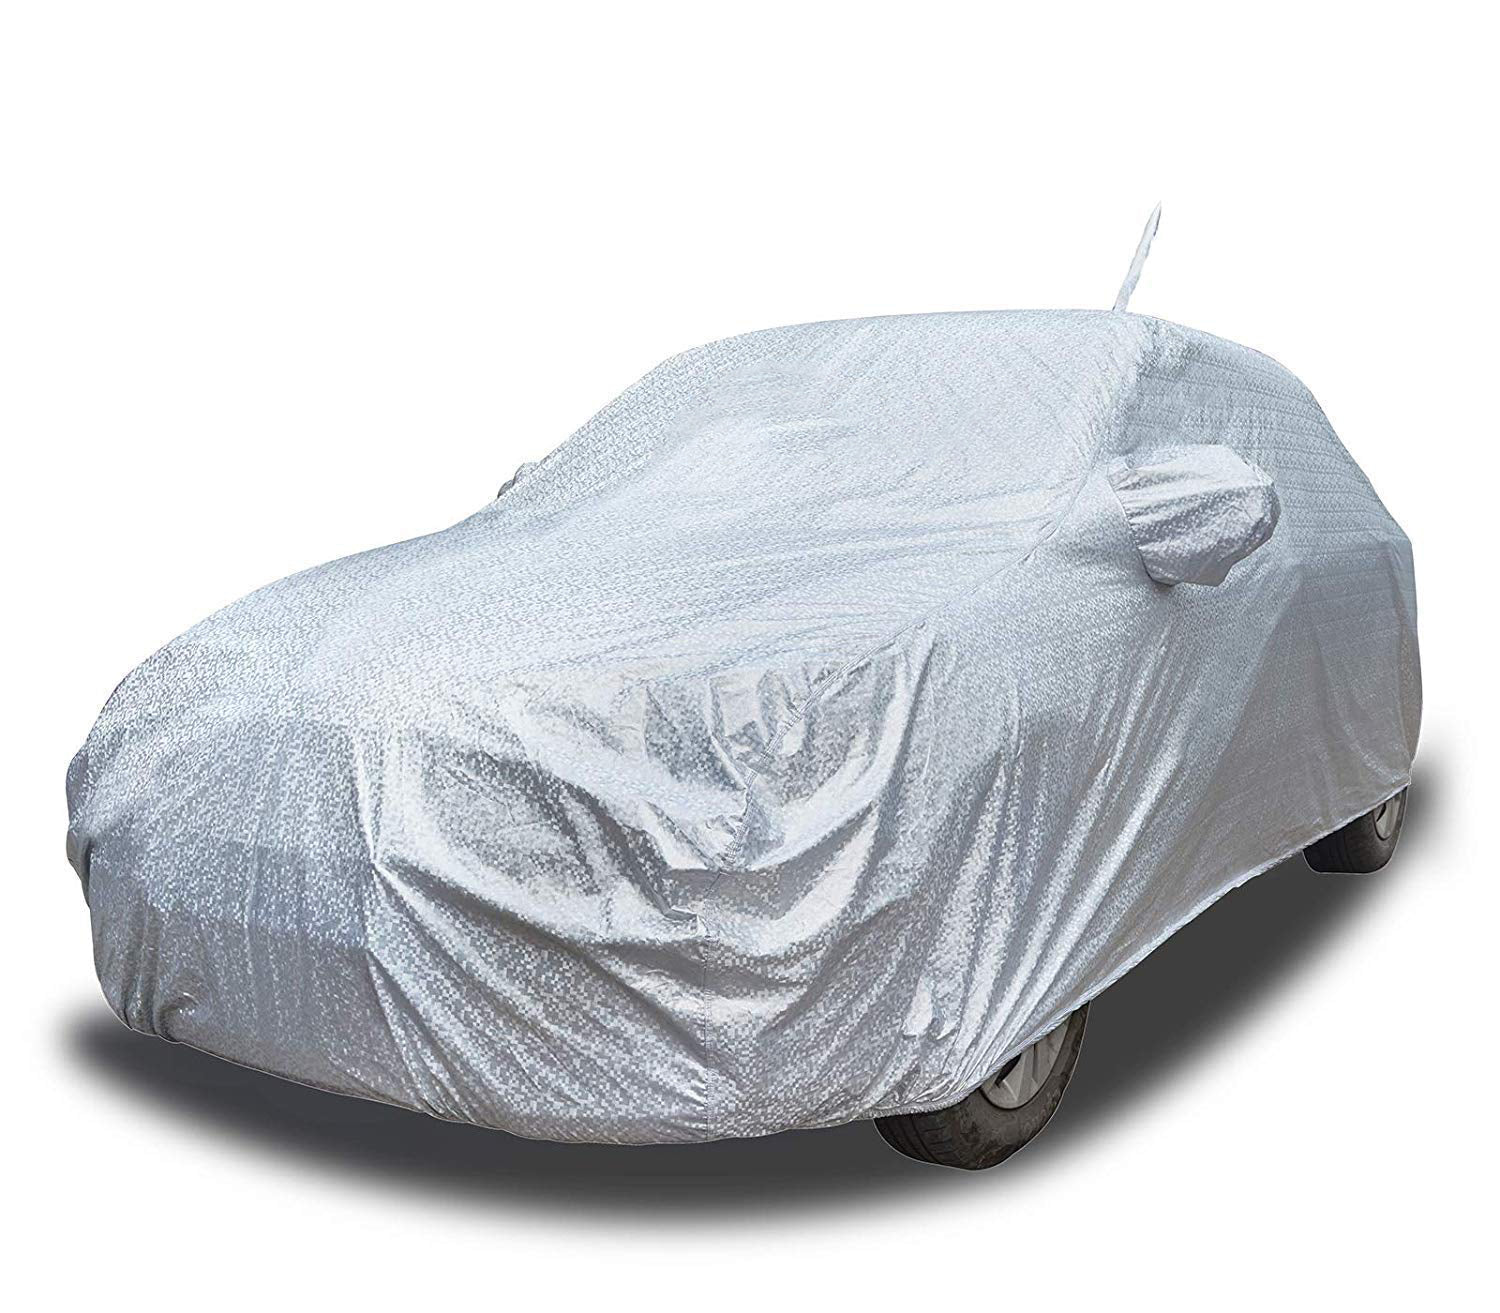 Fit Fly Car Cover For Maruti Suzuki Swift (With Mirror Pockets) Price in  India - Buy Fit Fly Car Cover For Maruti Suzuki Swift (With Mirror Pockets)  online at